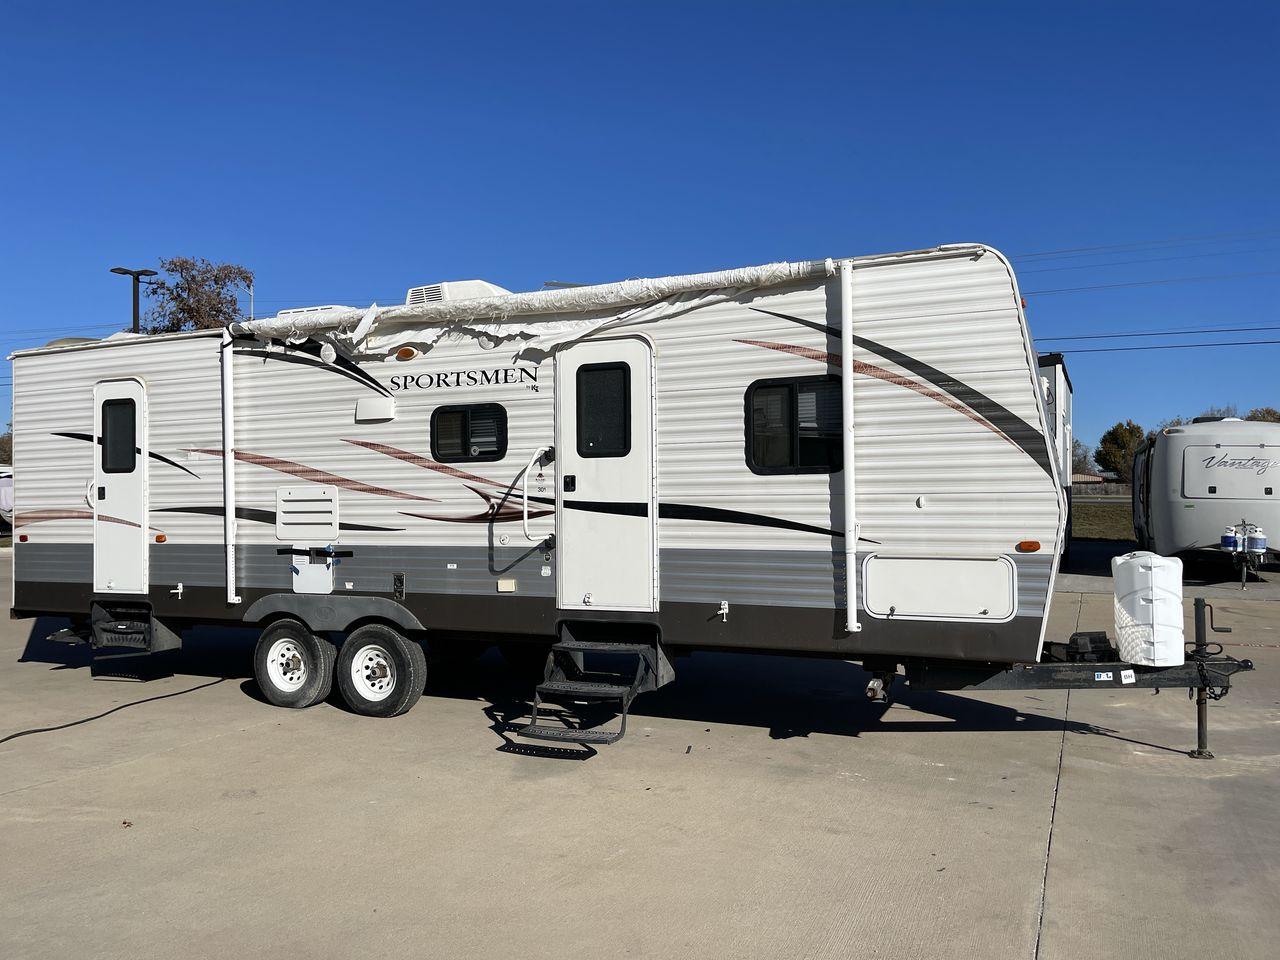 2013 WHITE KZ SPORTZMEN 301BH (4EZTS3029D5) , Length: 32.5 ft. | Dry Weight: 6,280 lbs. | Gross Weight: 8,000 lbs. | Slides: 1 transmission, located at 4319 N Main St, Cleburne, TX, 76033, (817) 678-5133, 32.385960, -97.391212 - This 2013 KZ Sportsmen 301BH travel trailer is the perfect lightweight camper for when you want to travel in style. It measures 32.5 ft in length, 8 ft in width, and 11.33 ft in height. This has a dry weight of 6,280 lbs with a payload capacity of 1,720 lbs. The GVWR of this trailer is 8,000 lbs, an - Photo #22